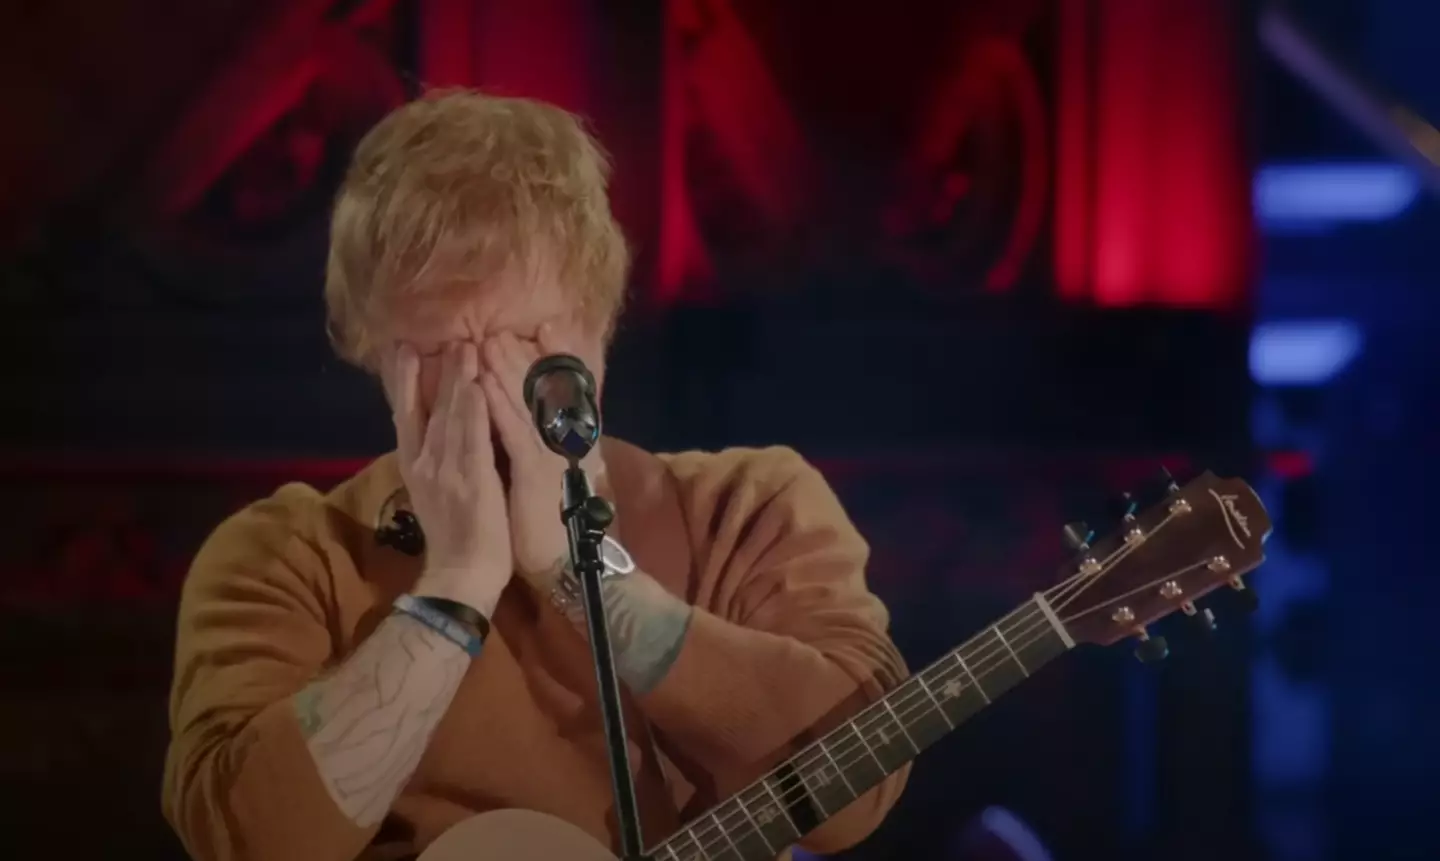 Sheeran opens up about what he went through last year in a new Disney+ documentary.